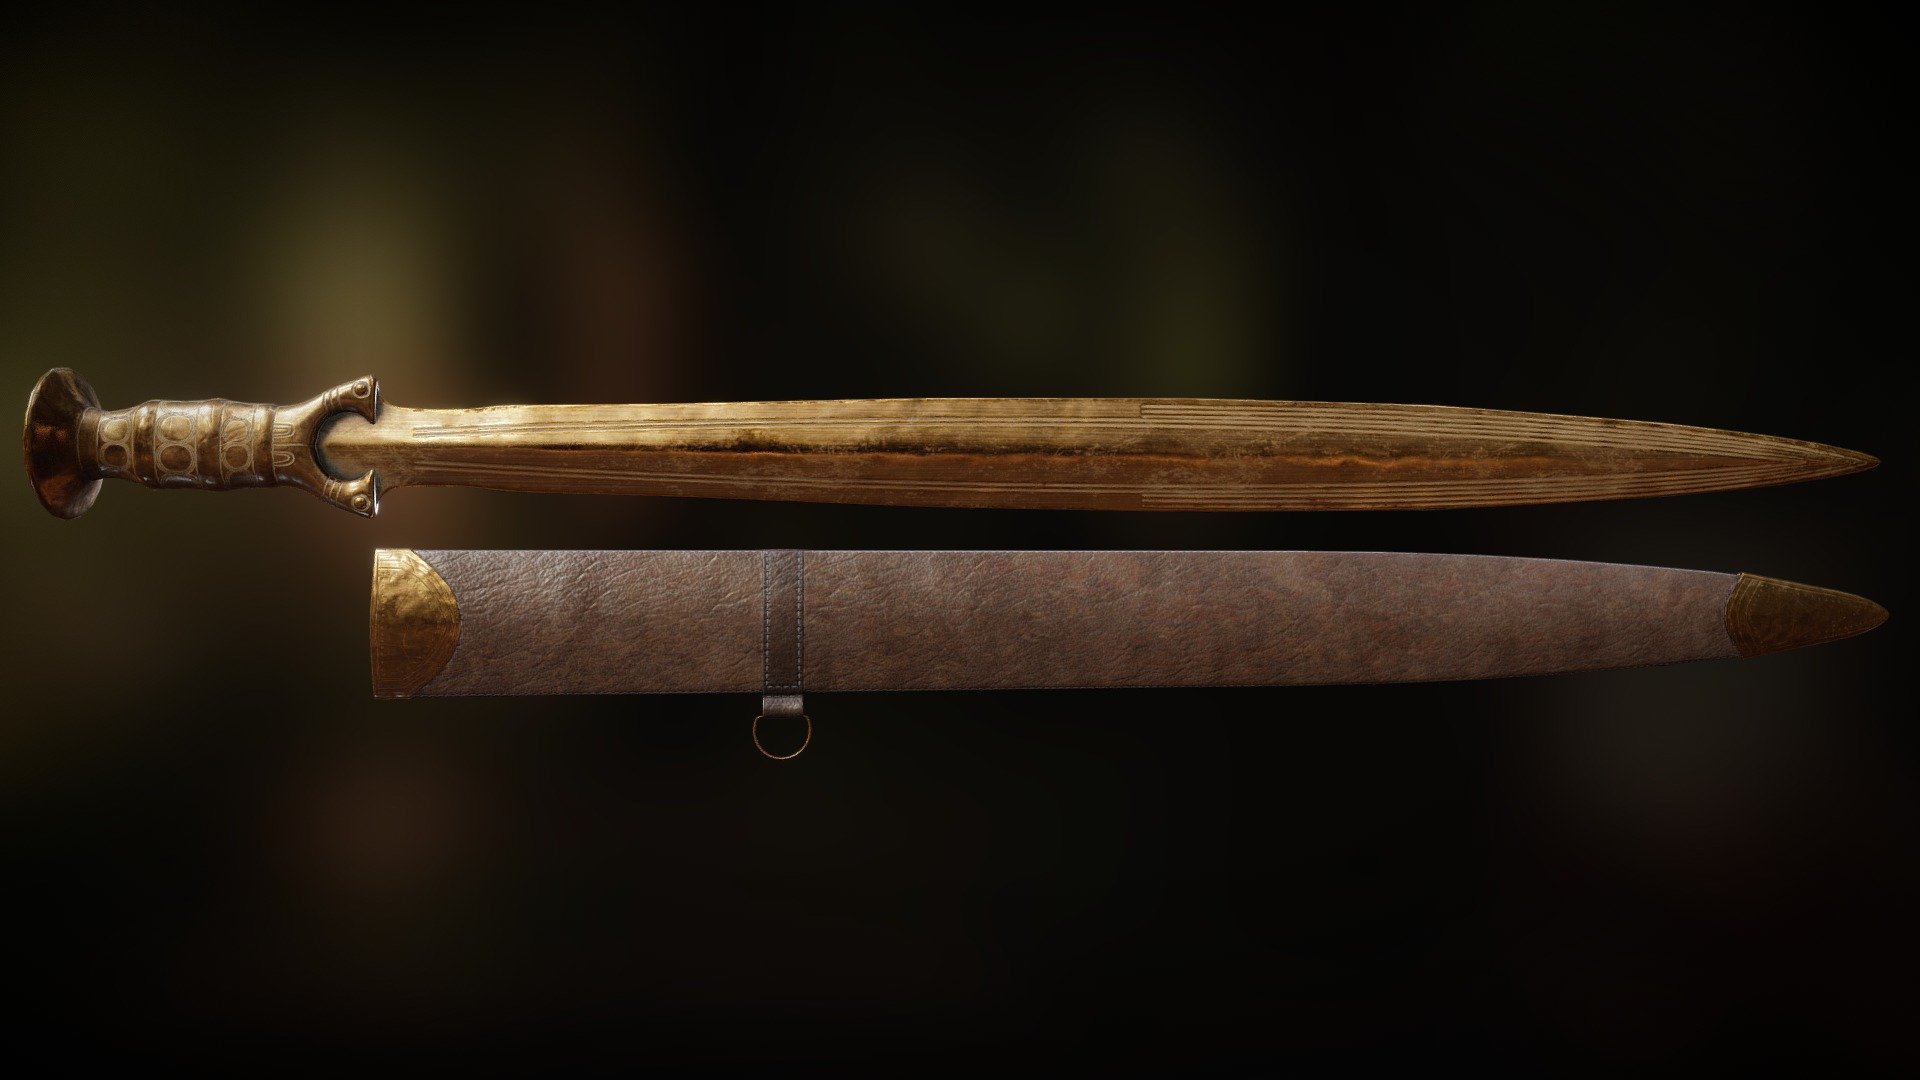 Northern European bronze sword from the 15th century BCE. Based on this sword from the Oakeshott Collection: https://sketchfab.com/3d-models/bronze-age-sword-7c0316ffbfd34c2393fbb4e7663e11aa - Bronze Age Sword and Scabbard - Buy Royalty Free 3D model by Joseph Gush (@joe.gush_3d) 3d model